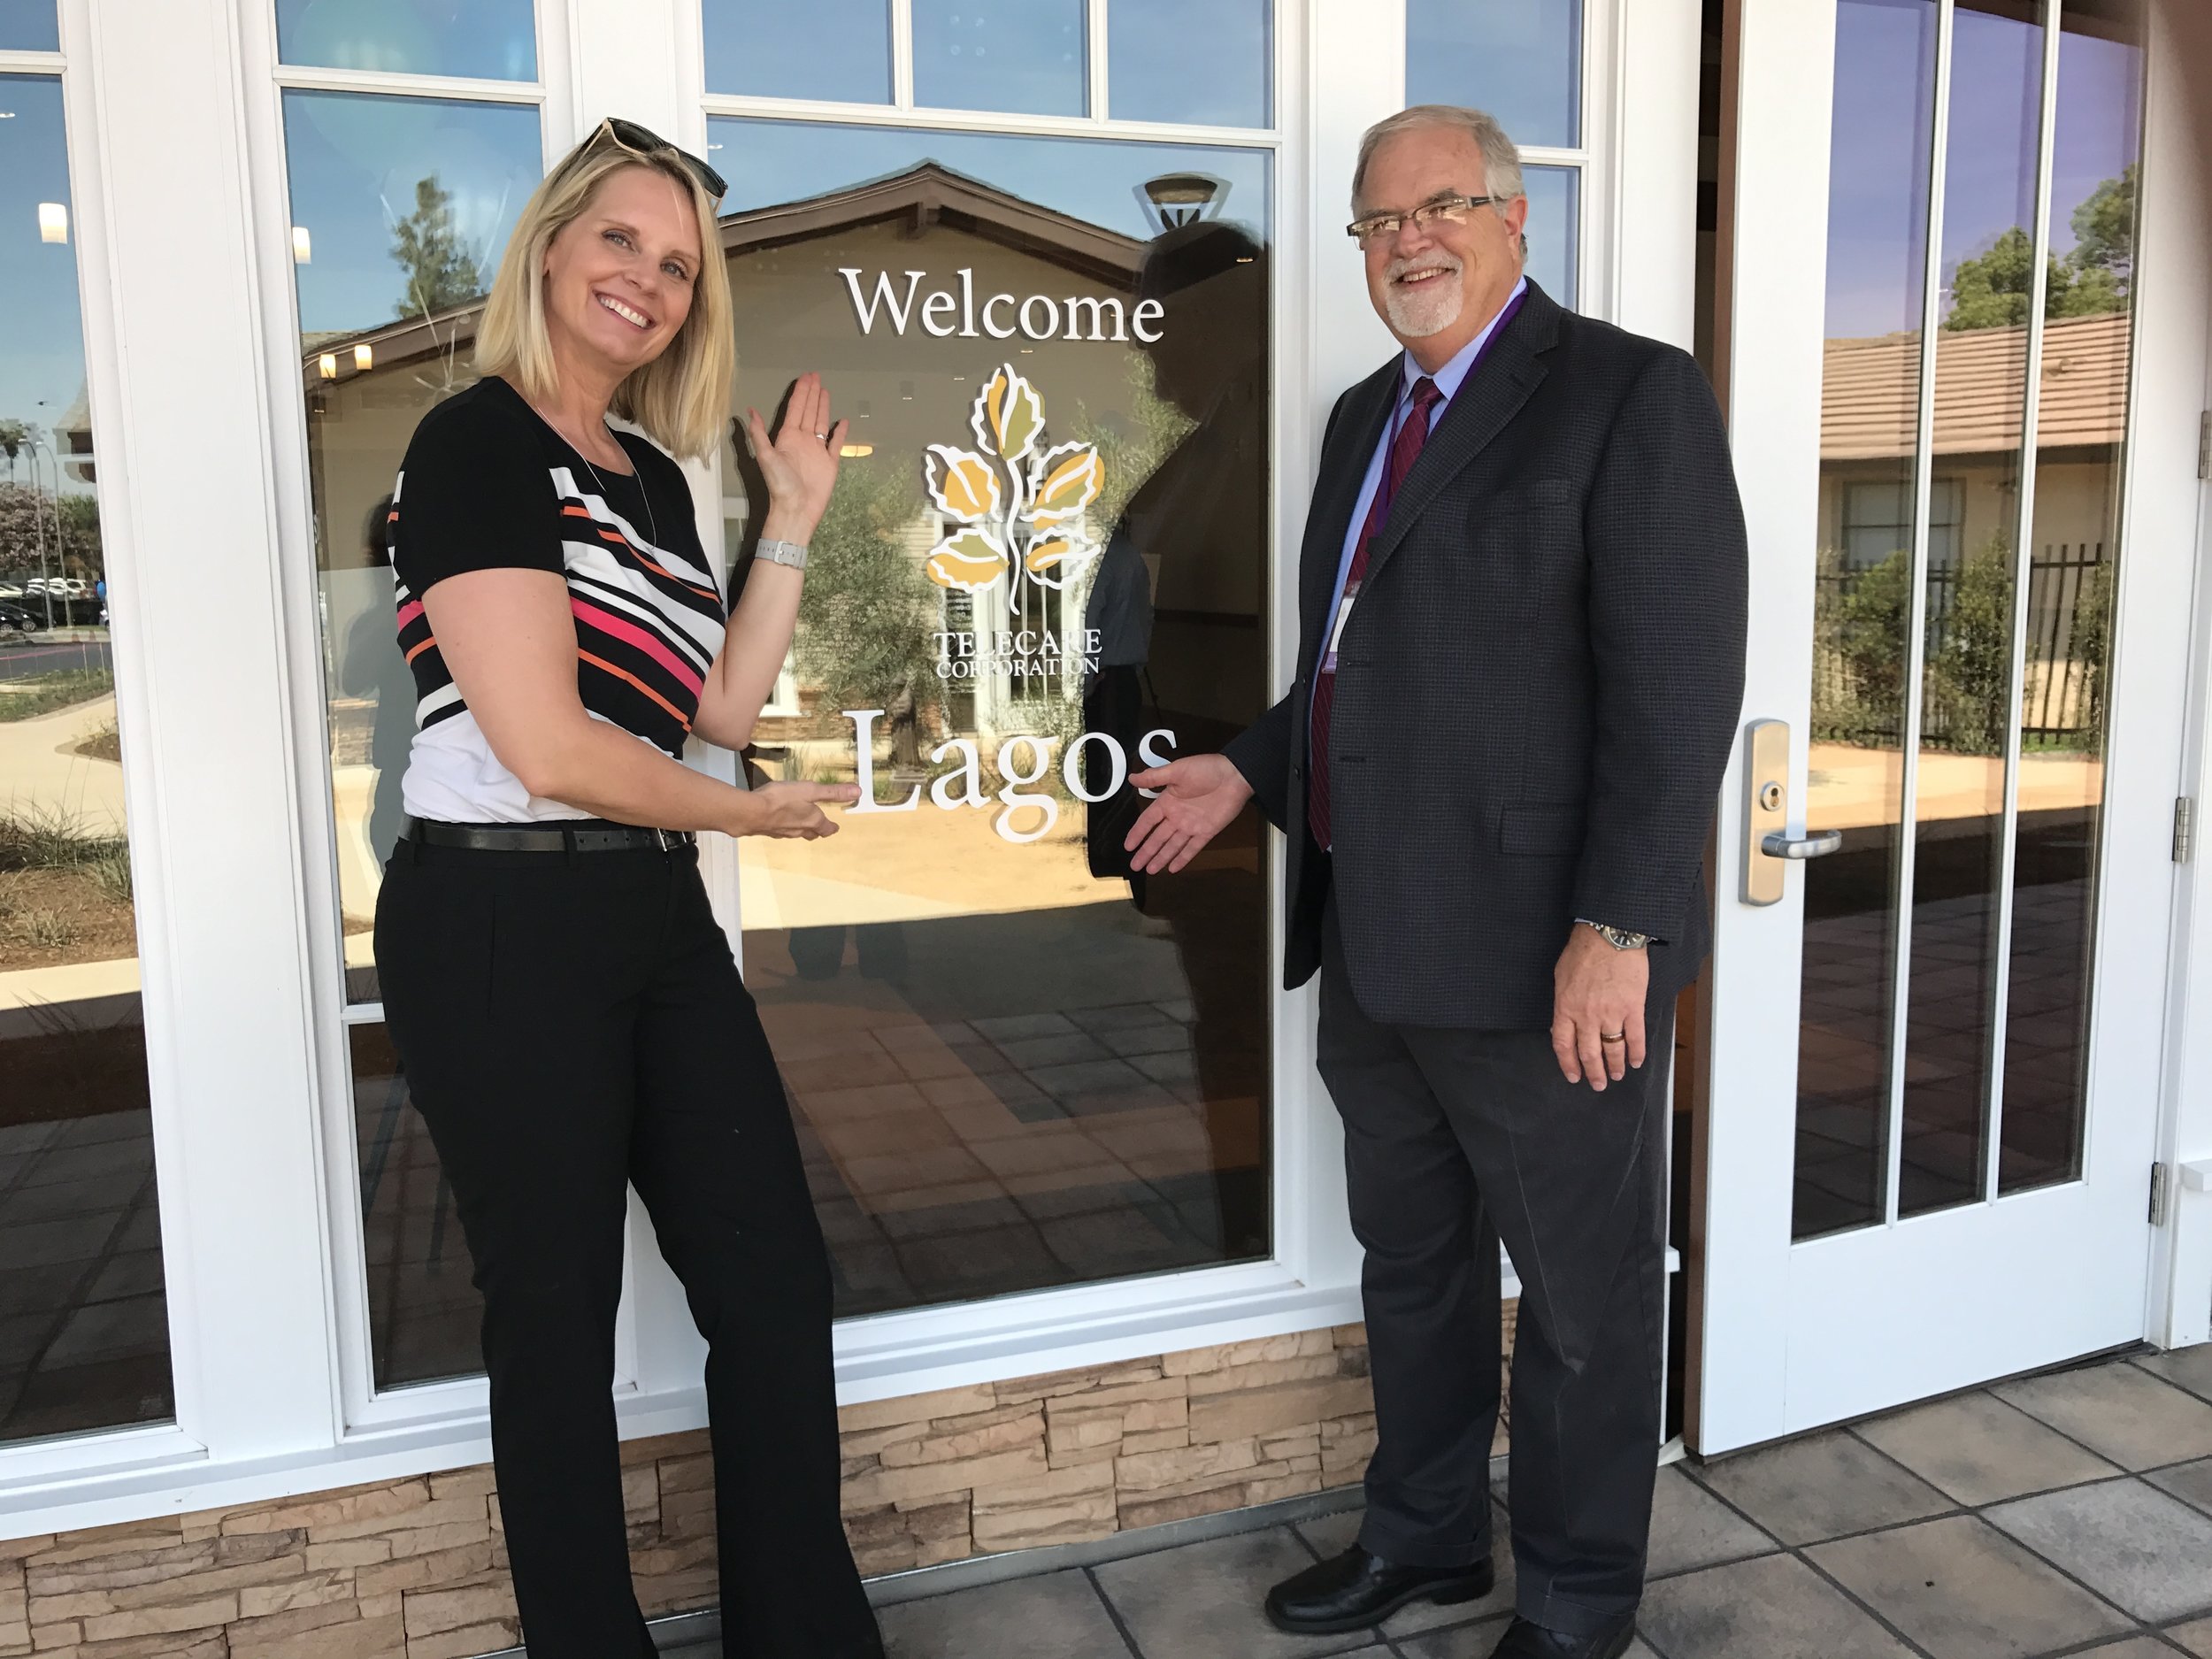   Jennifer Hinkel , Vice President of Development, and  Gary Hubbard ,&nbsp;Vice President of Operations of Southern California and Arizona, at the Lagos ribbon cutting ceremony and open house on May 3. 